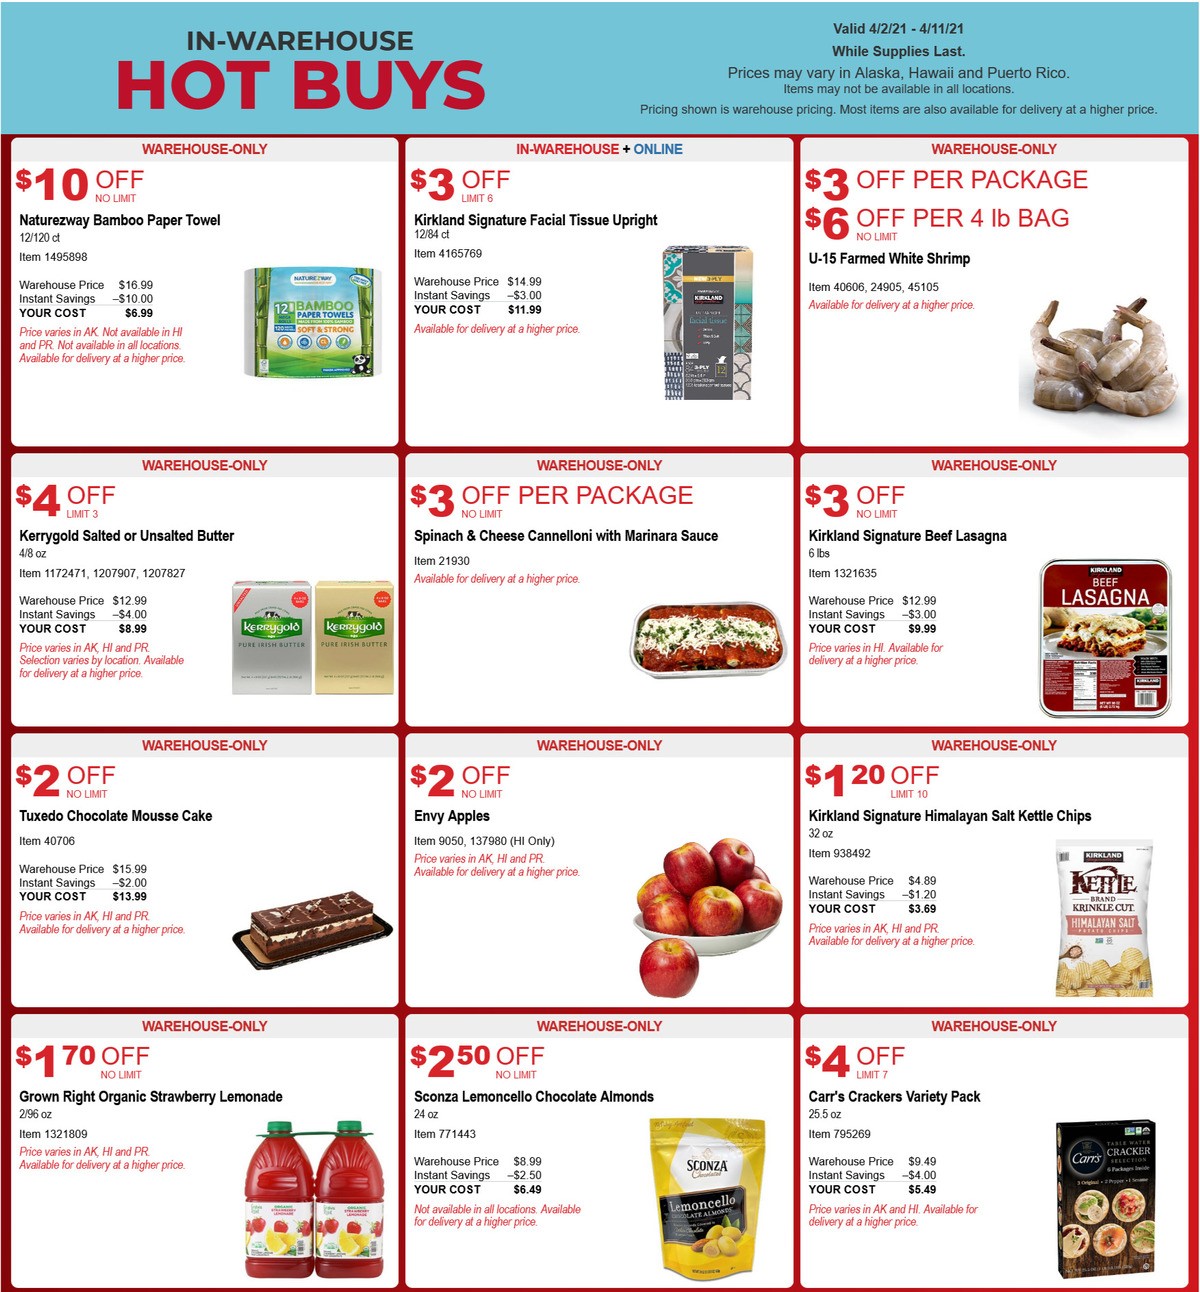 Costco Hot Buys Special Buys and Warehouse Savings from April 2